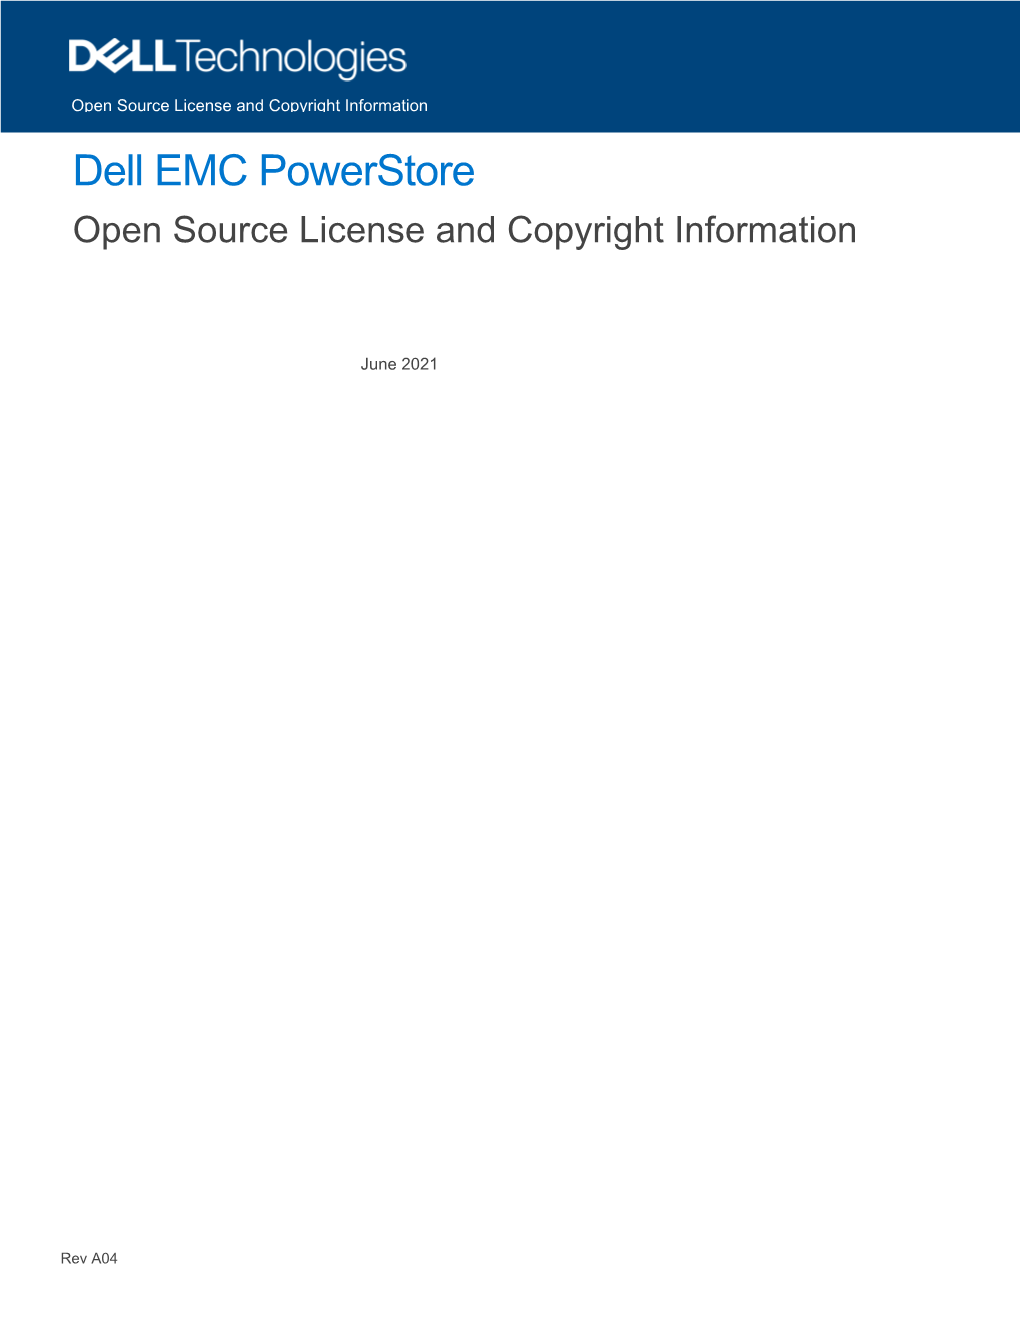 Dell EMC Powerstore Open Source License and Copyright Information